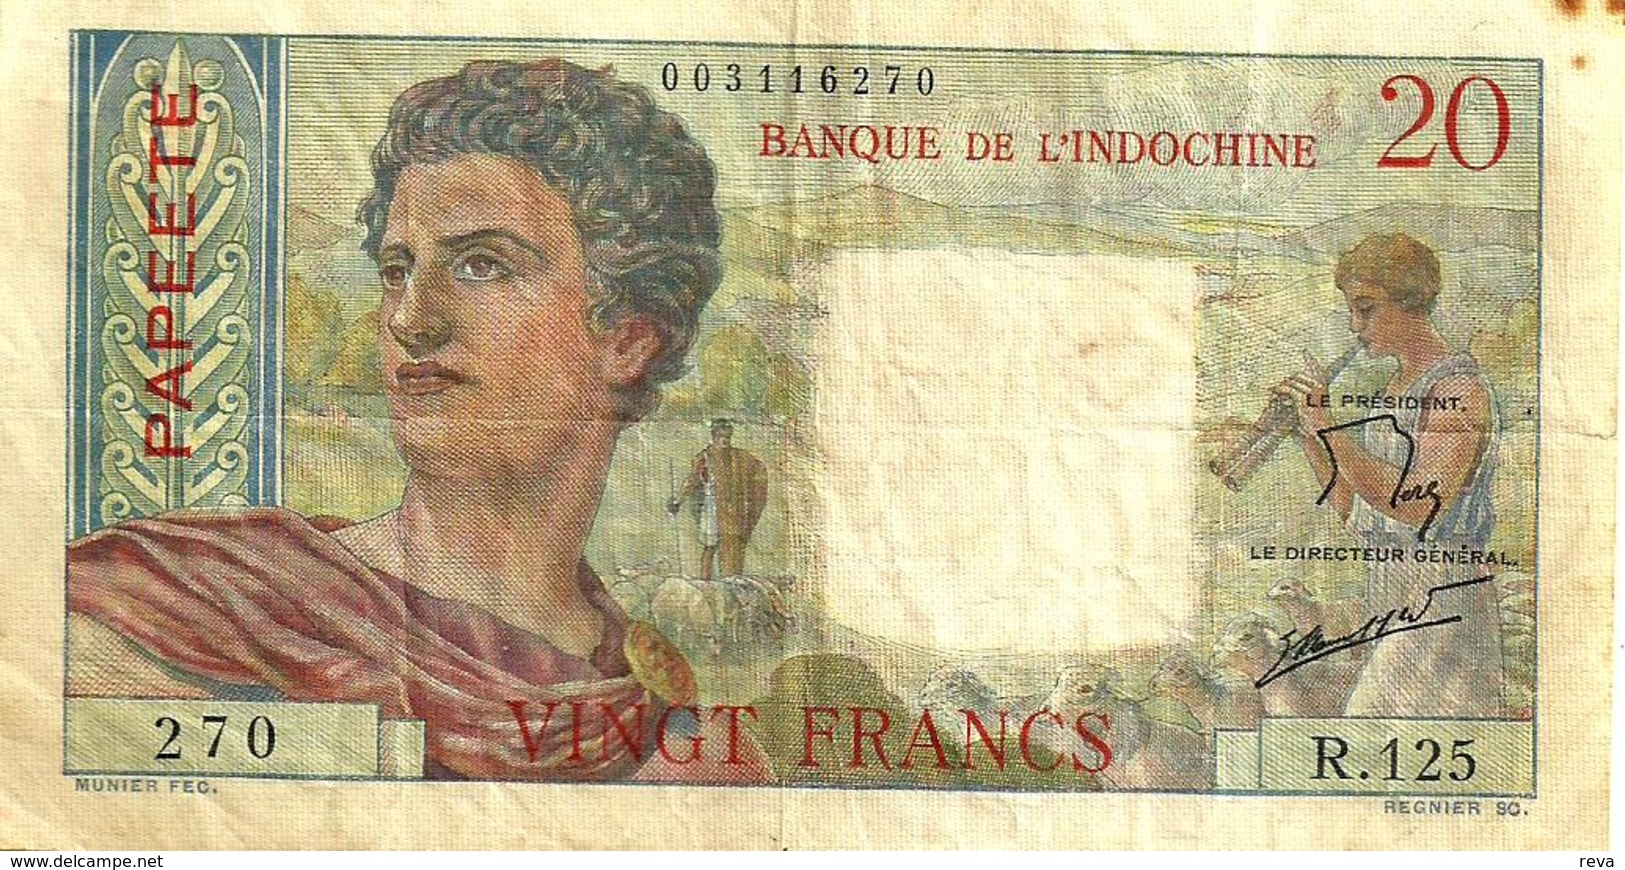 FRENCH POLYNESIA 20 FRANCS GREY MAN HEAD FRONT WOMAN BACK NOT DATED(1951) P21a 1ST SIG VARIETY VF READ DESCRIPTION!! - Papeete (Polynésie Française 1914-1985)